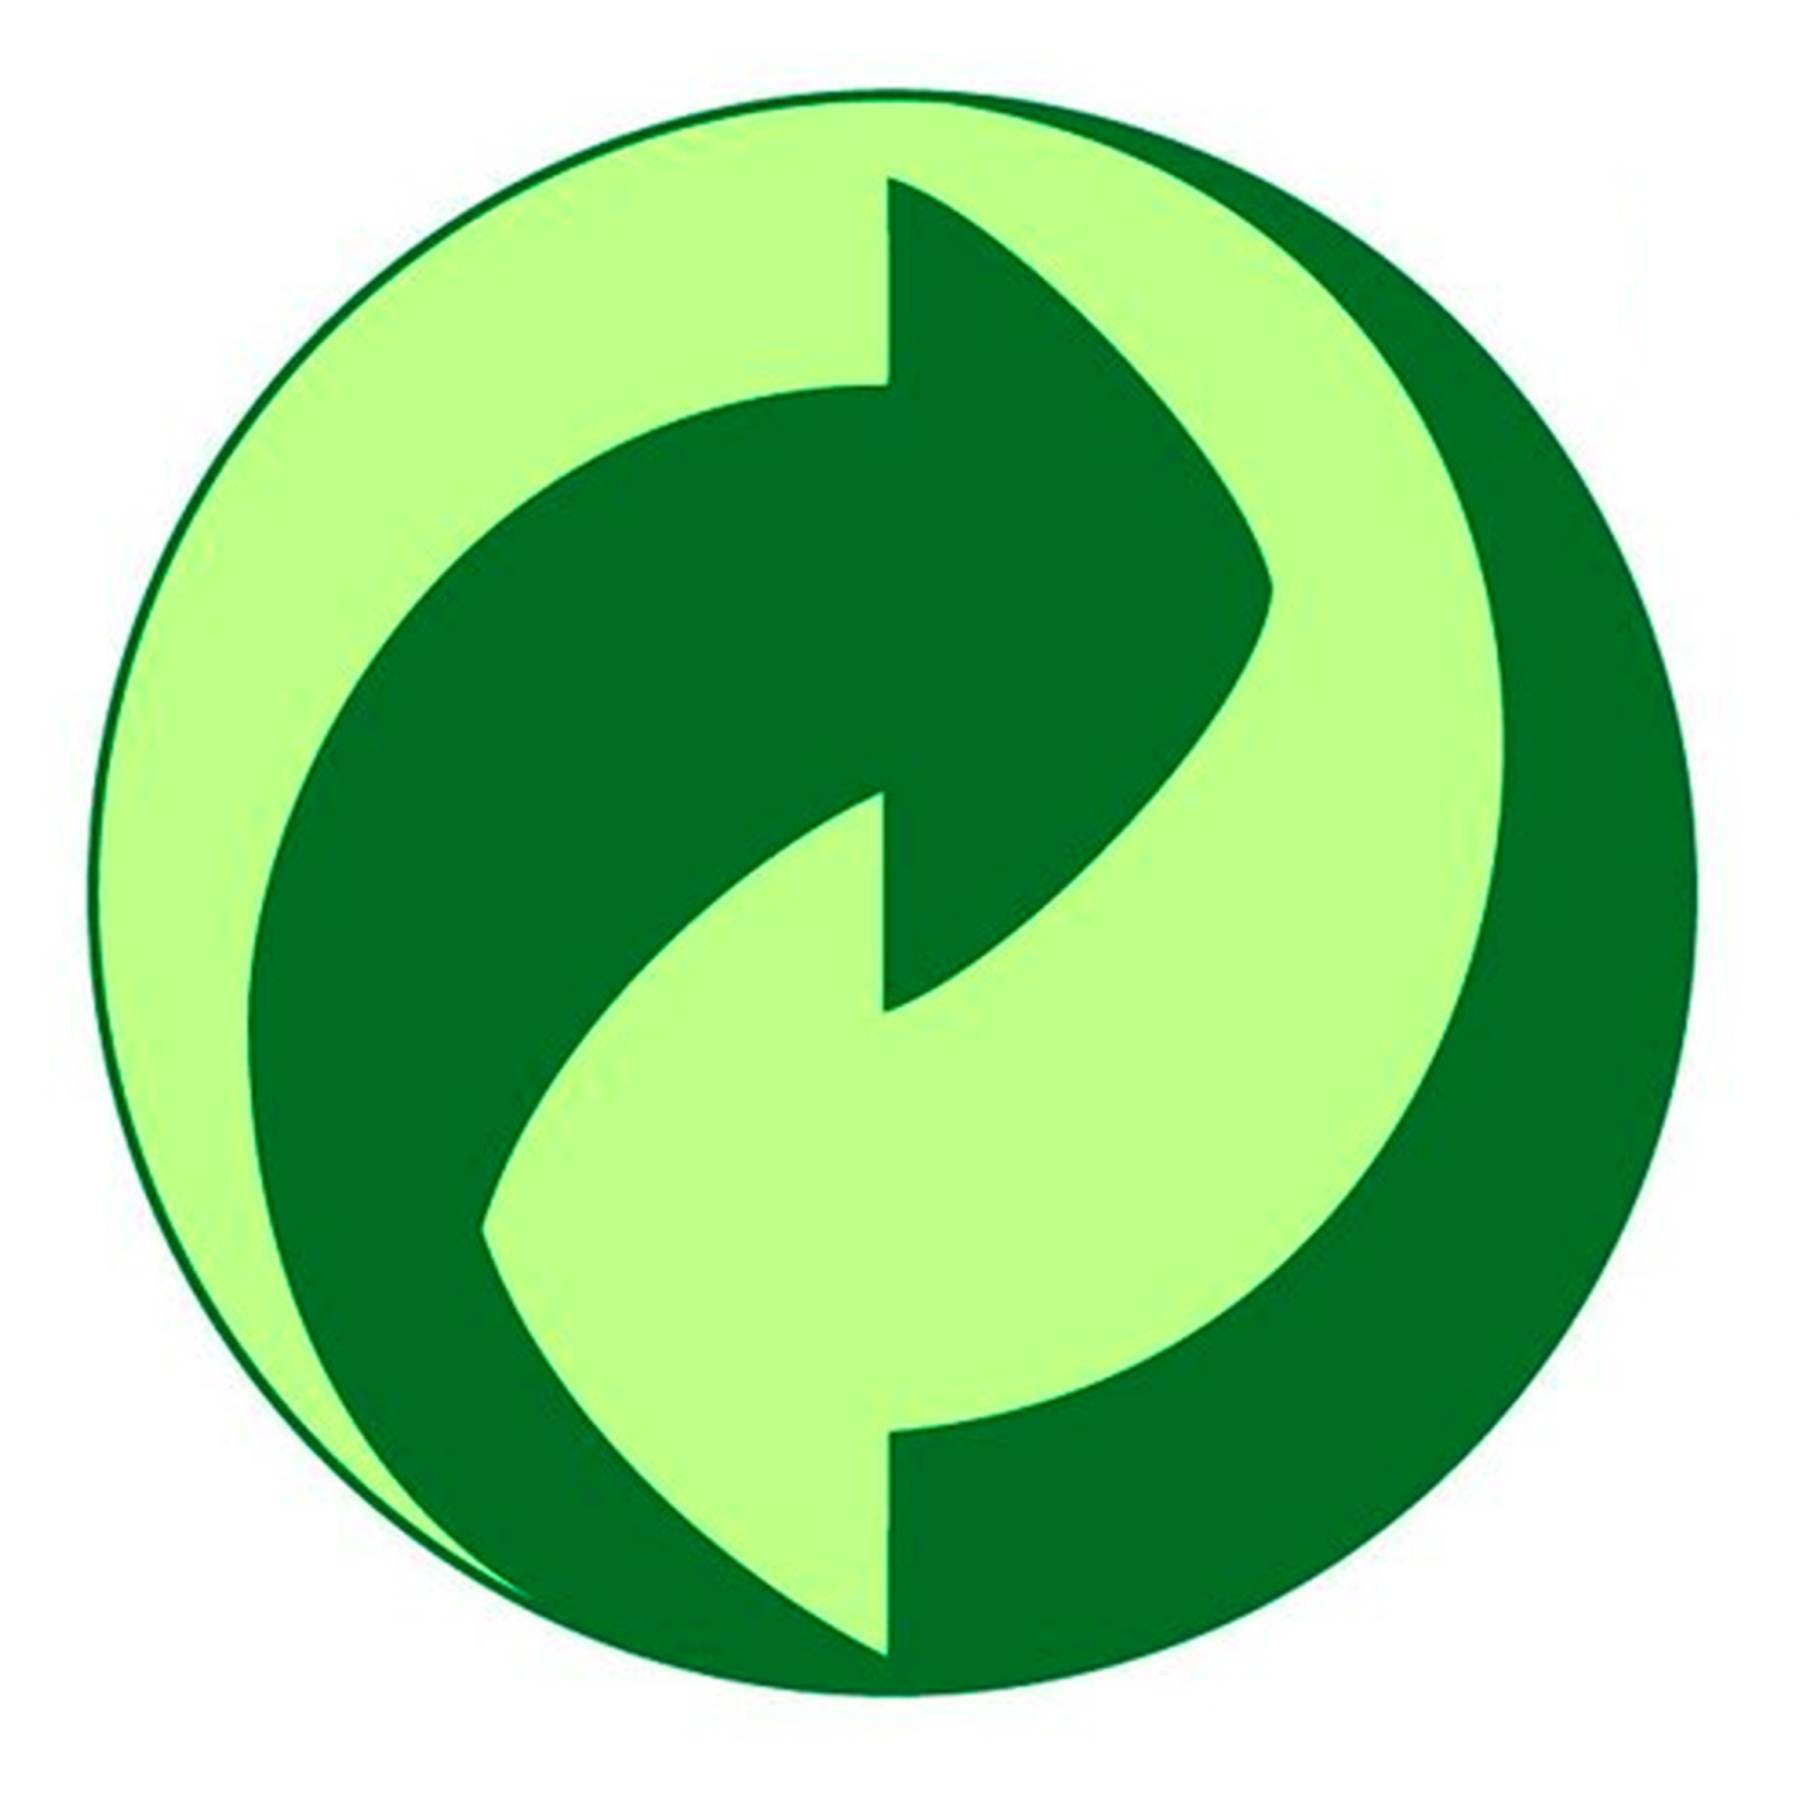 Recyle Logo - What All The Recycling Symbols Mean